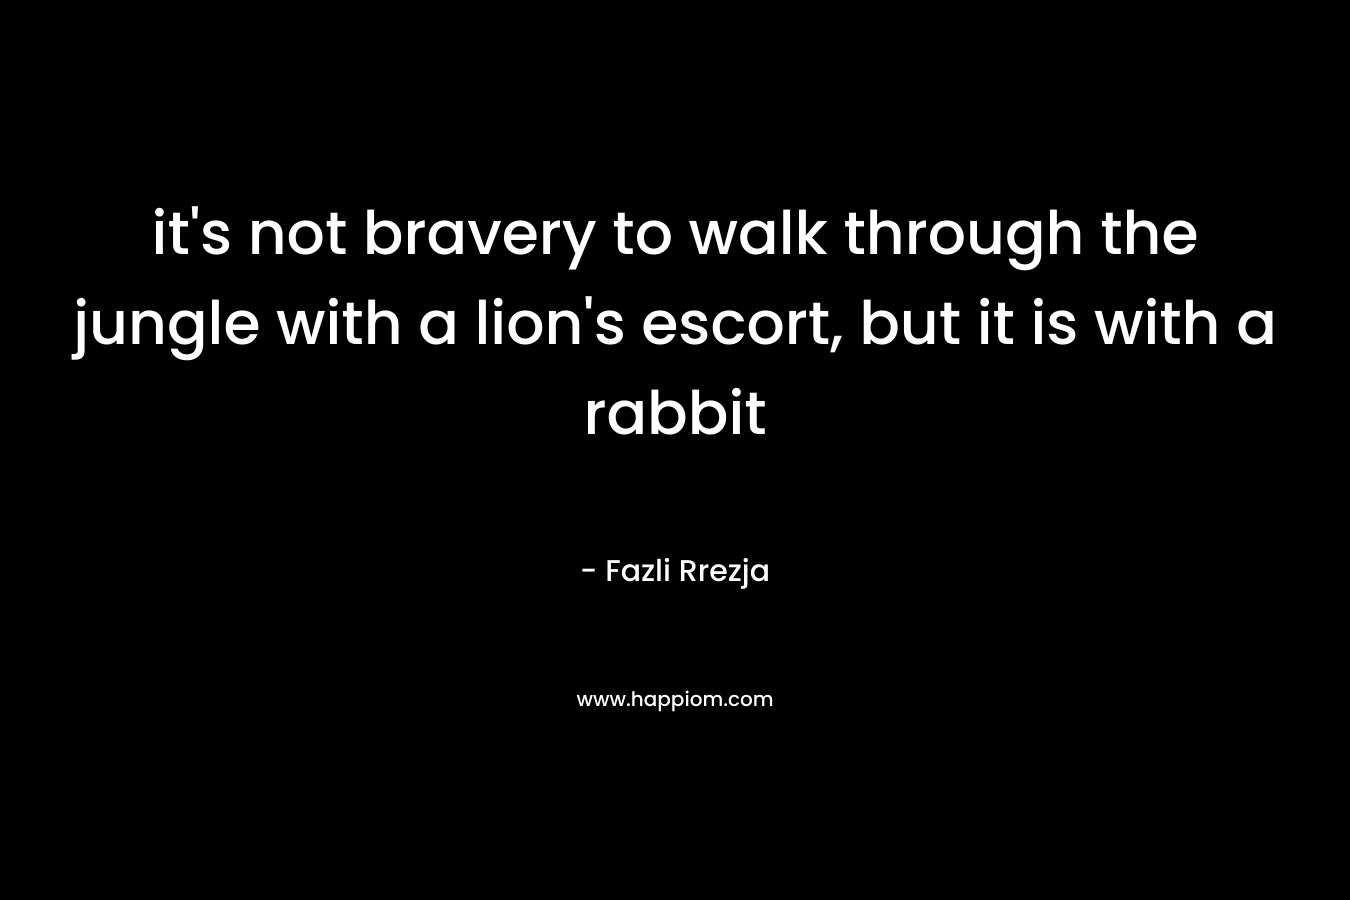 it’s not bravery to walk through the jungle with a lion’s escort, but it is with a rabbit – Fazli Rrezja